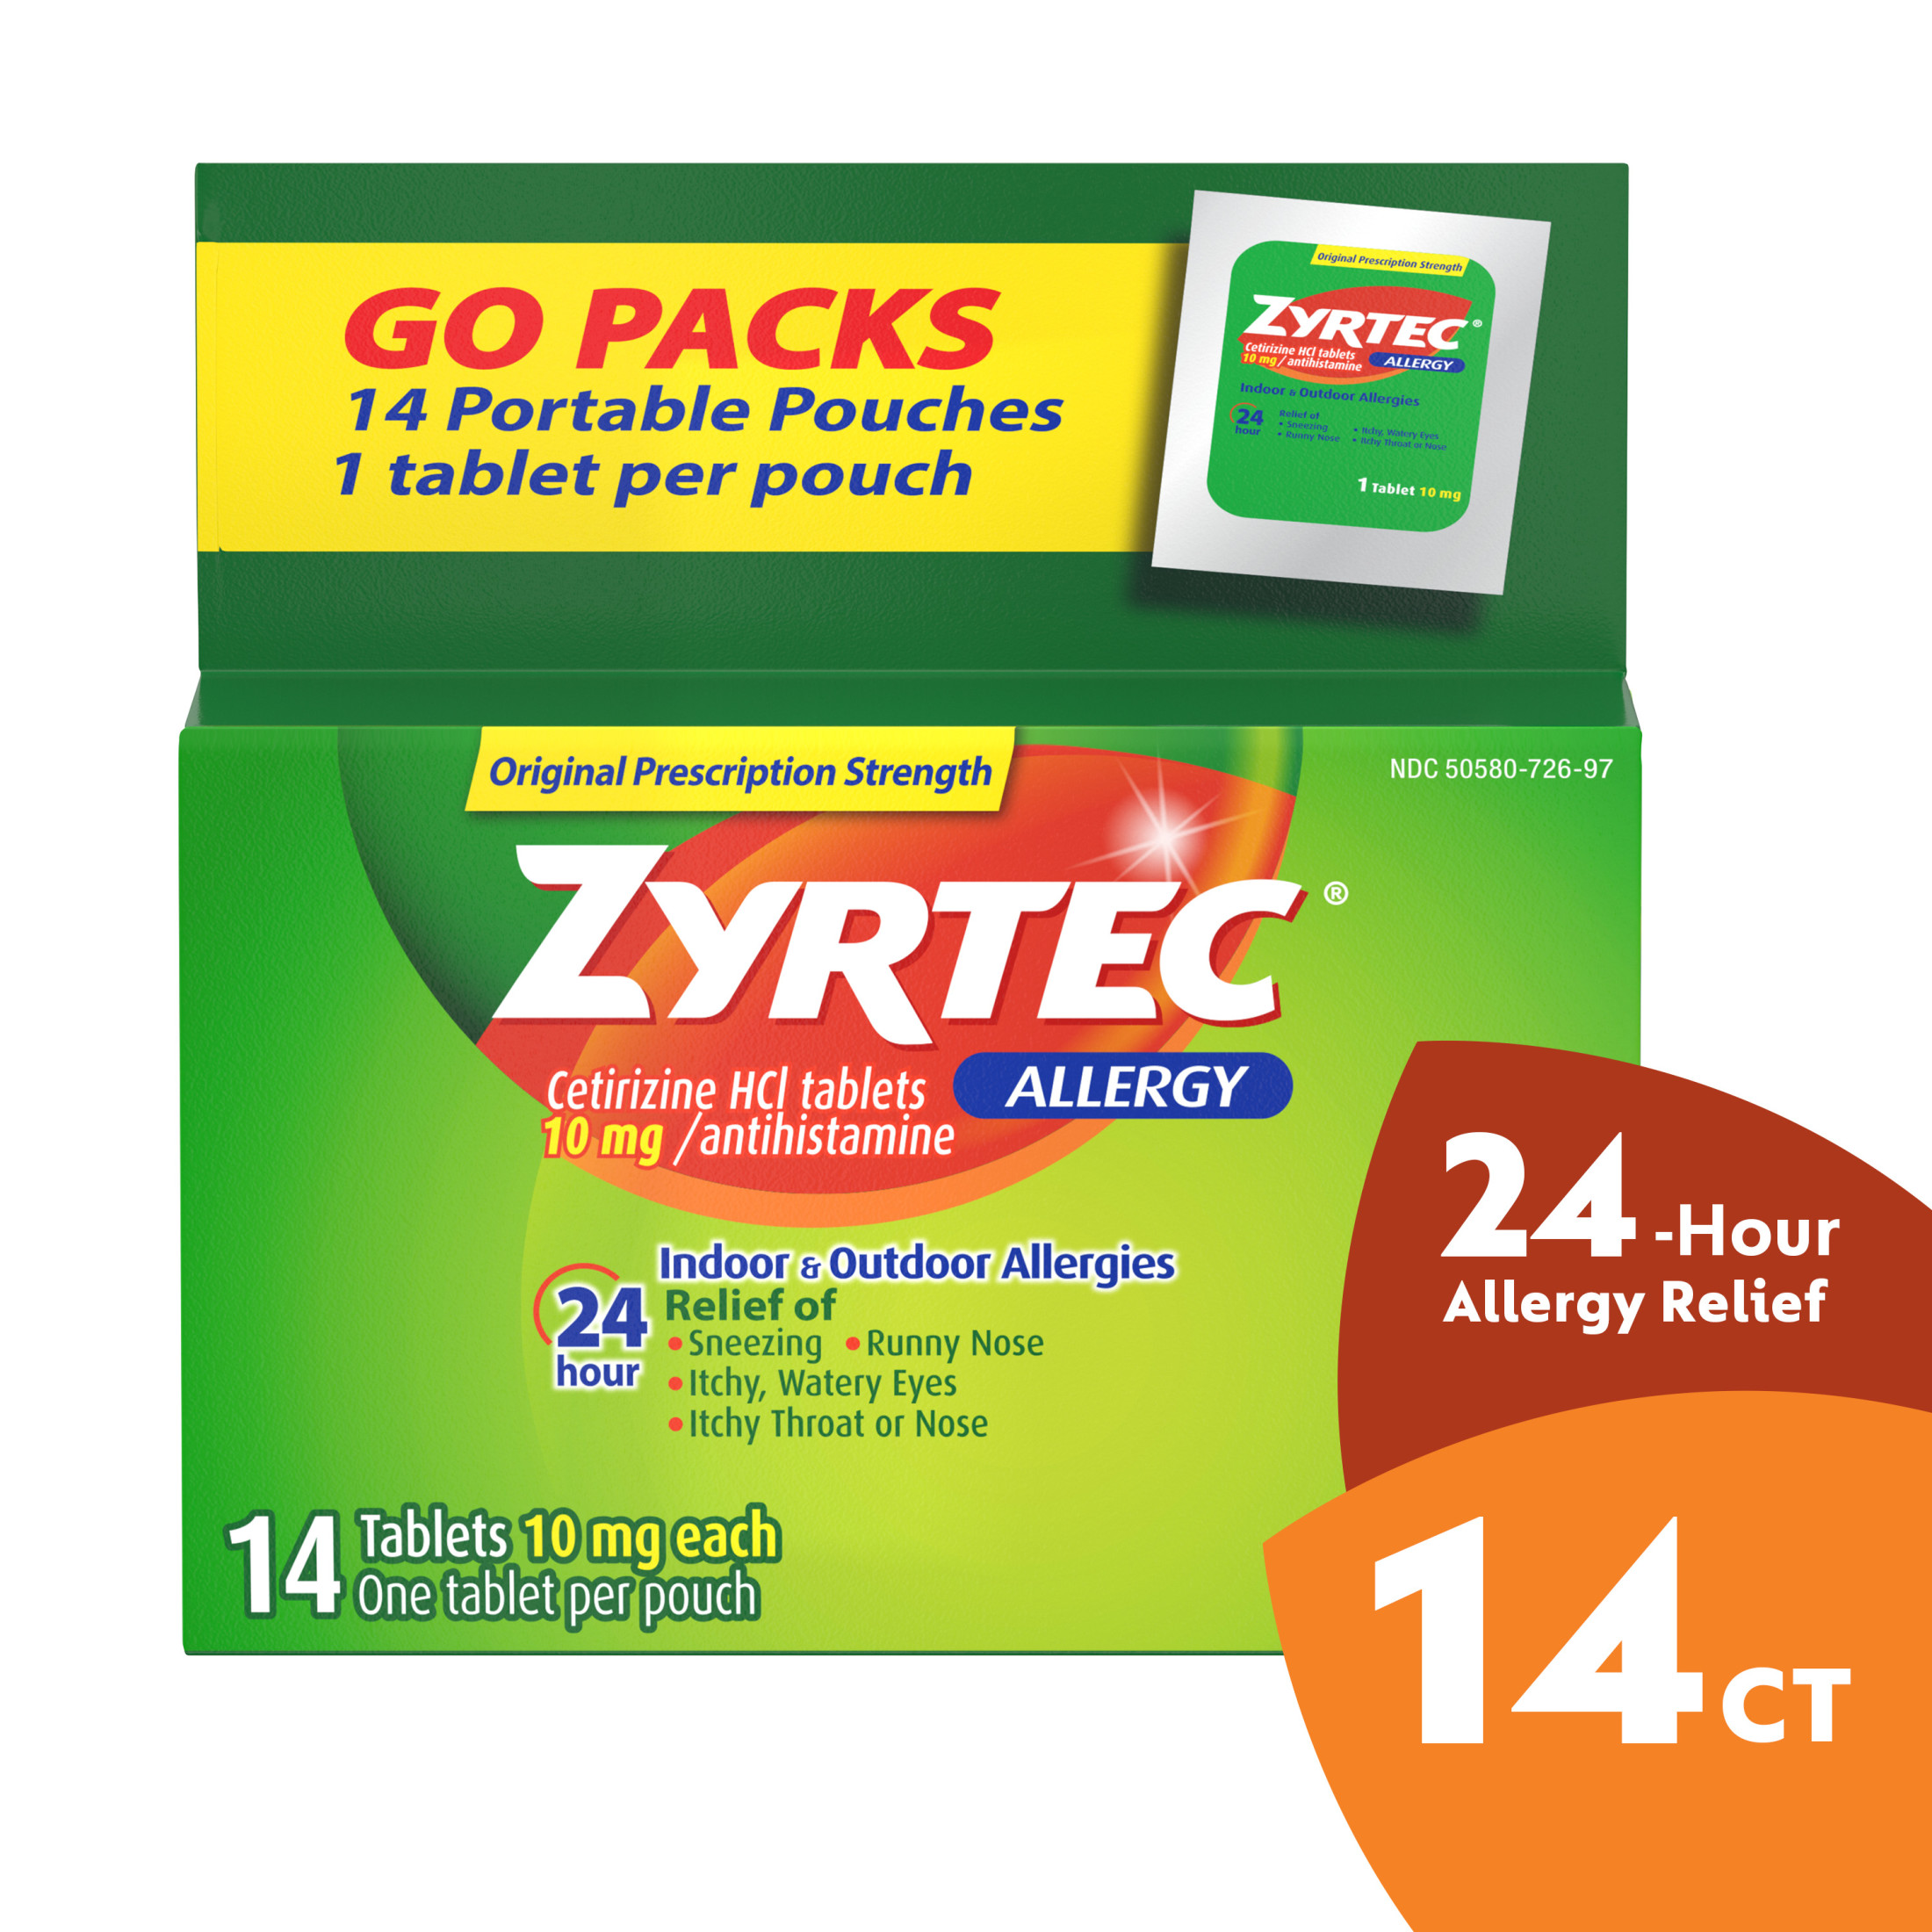 Zyrtec 24 Hour Allergy Relief Tablets, Cetirizine HCl, 14 Ct, (14 x 1 Ct) - image 1 of 8